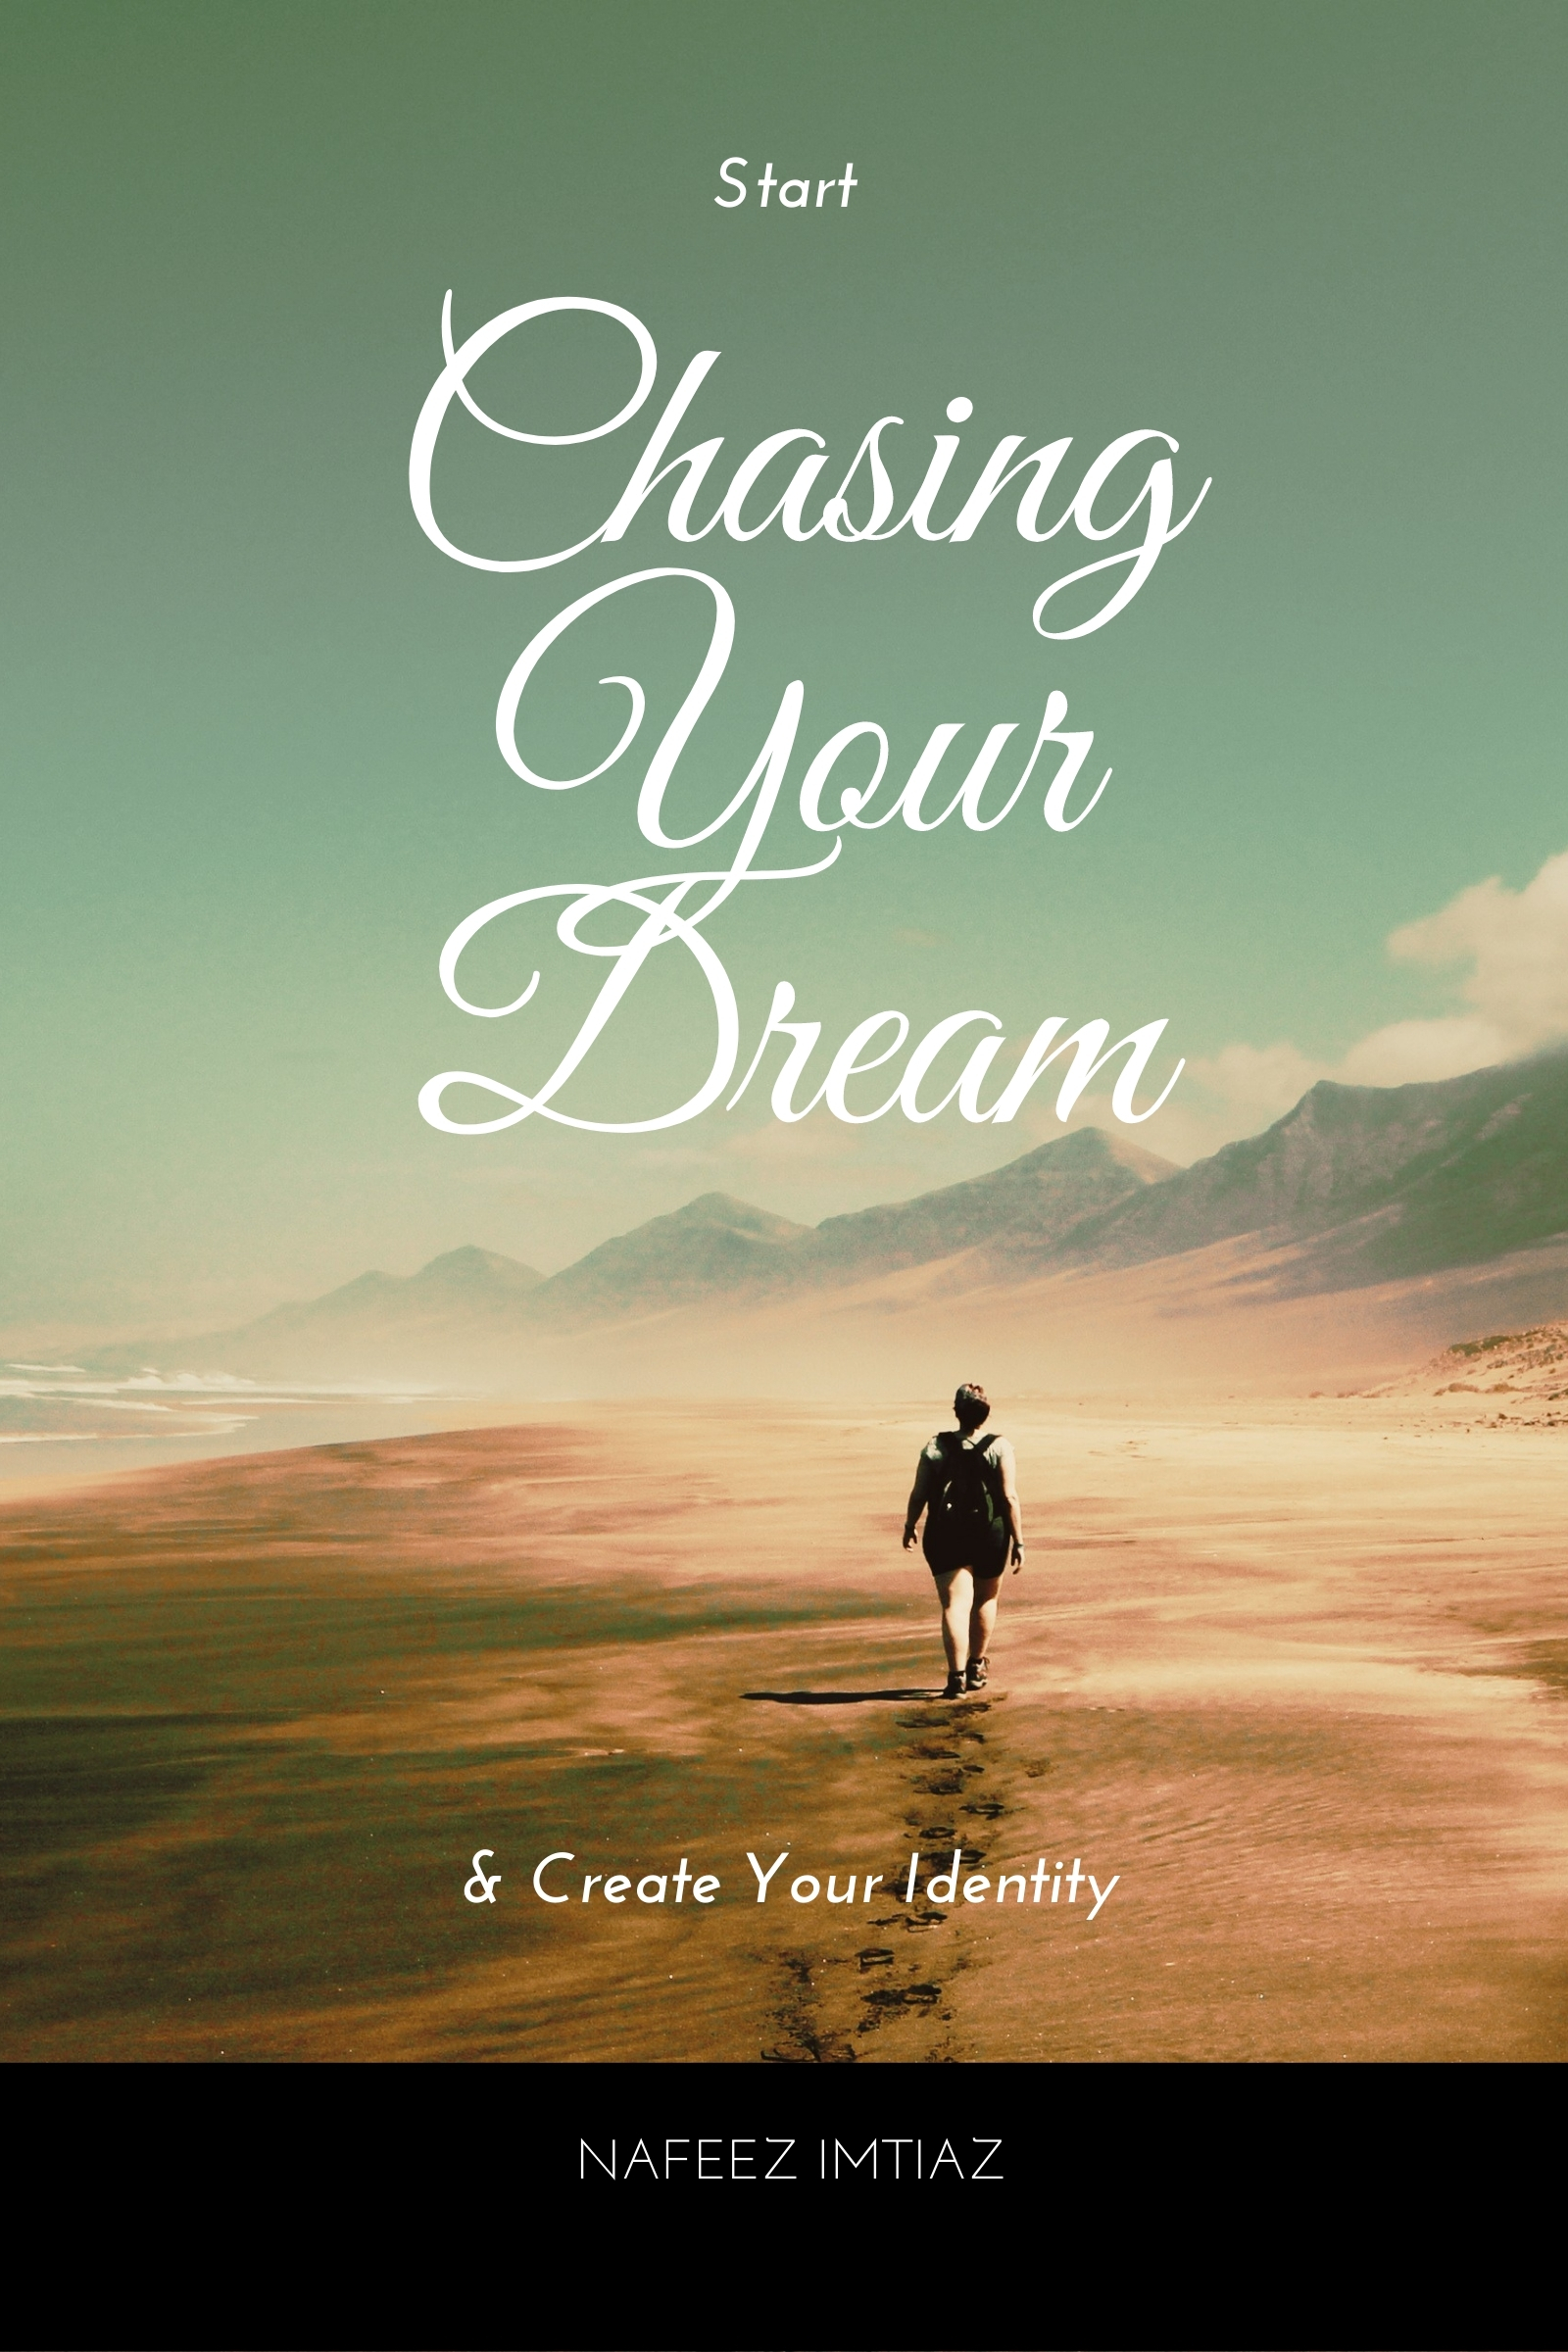 FREE: Start Chasing Your Dream & Create Your Identity by Nafeez Imtiaz